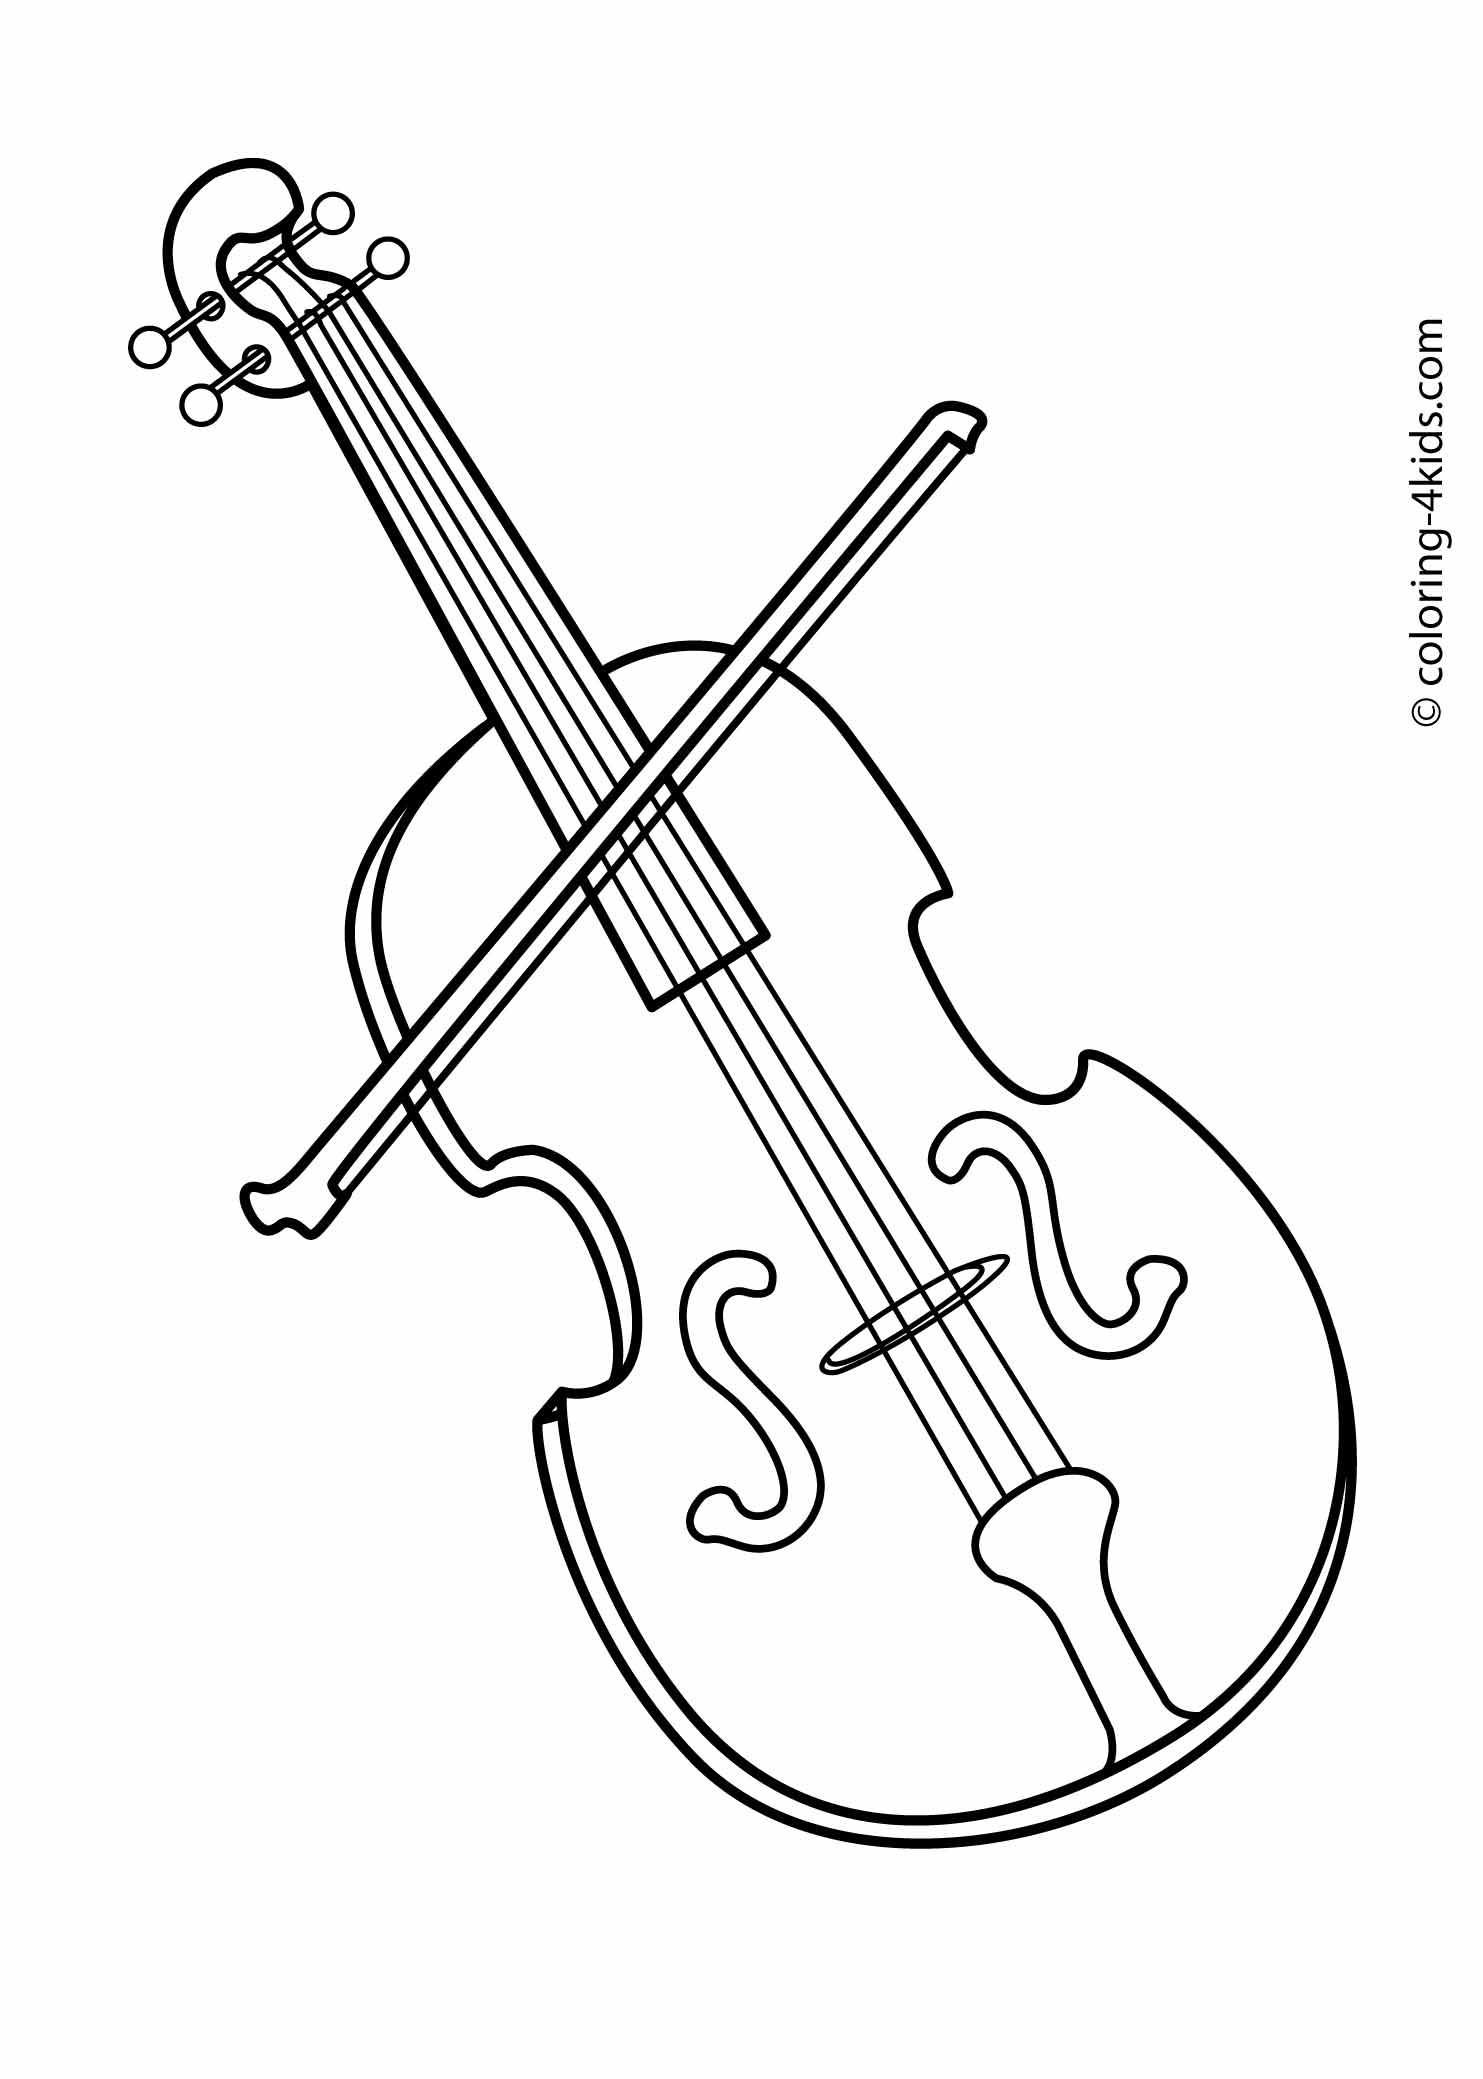 free-musical-instruments-drawings-download-free-musical-instruments